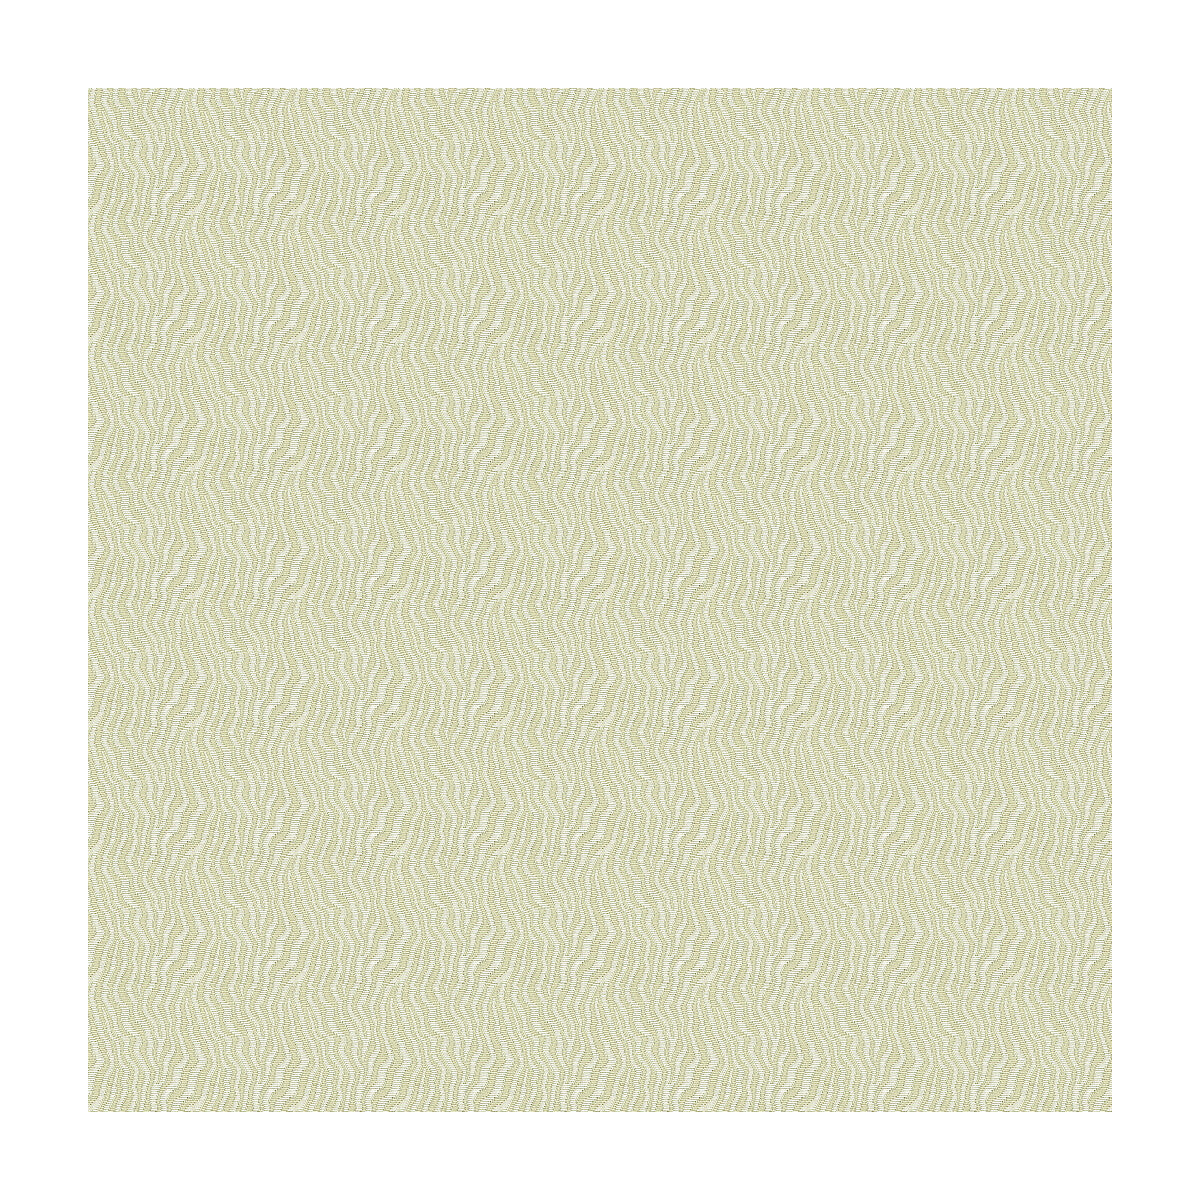 Jentry fabric in pearl color - pattern 32009.111.0 - by Kravet Design in the Candice Olson collection